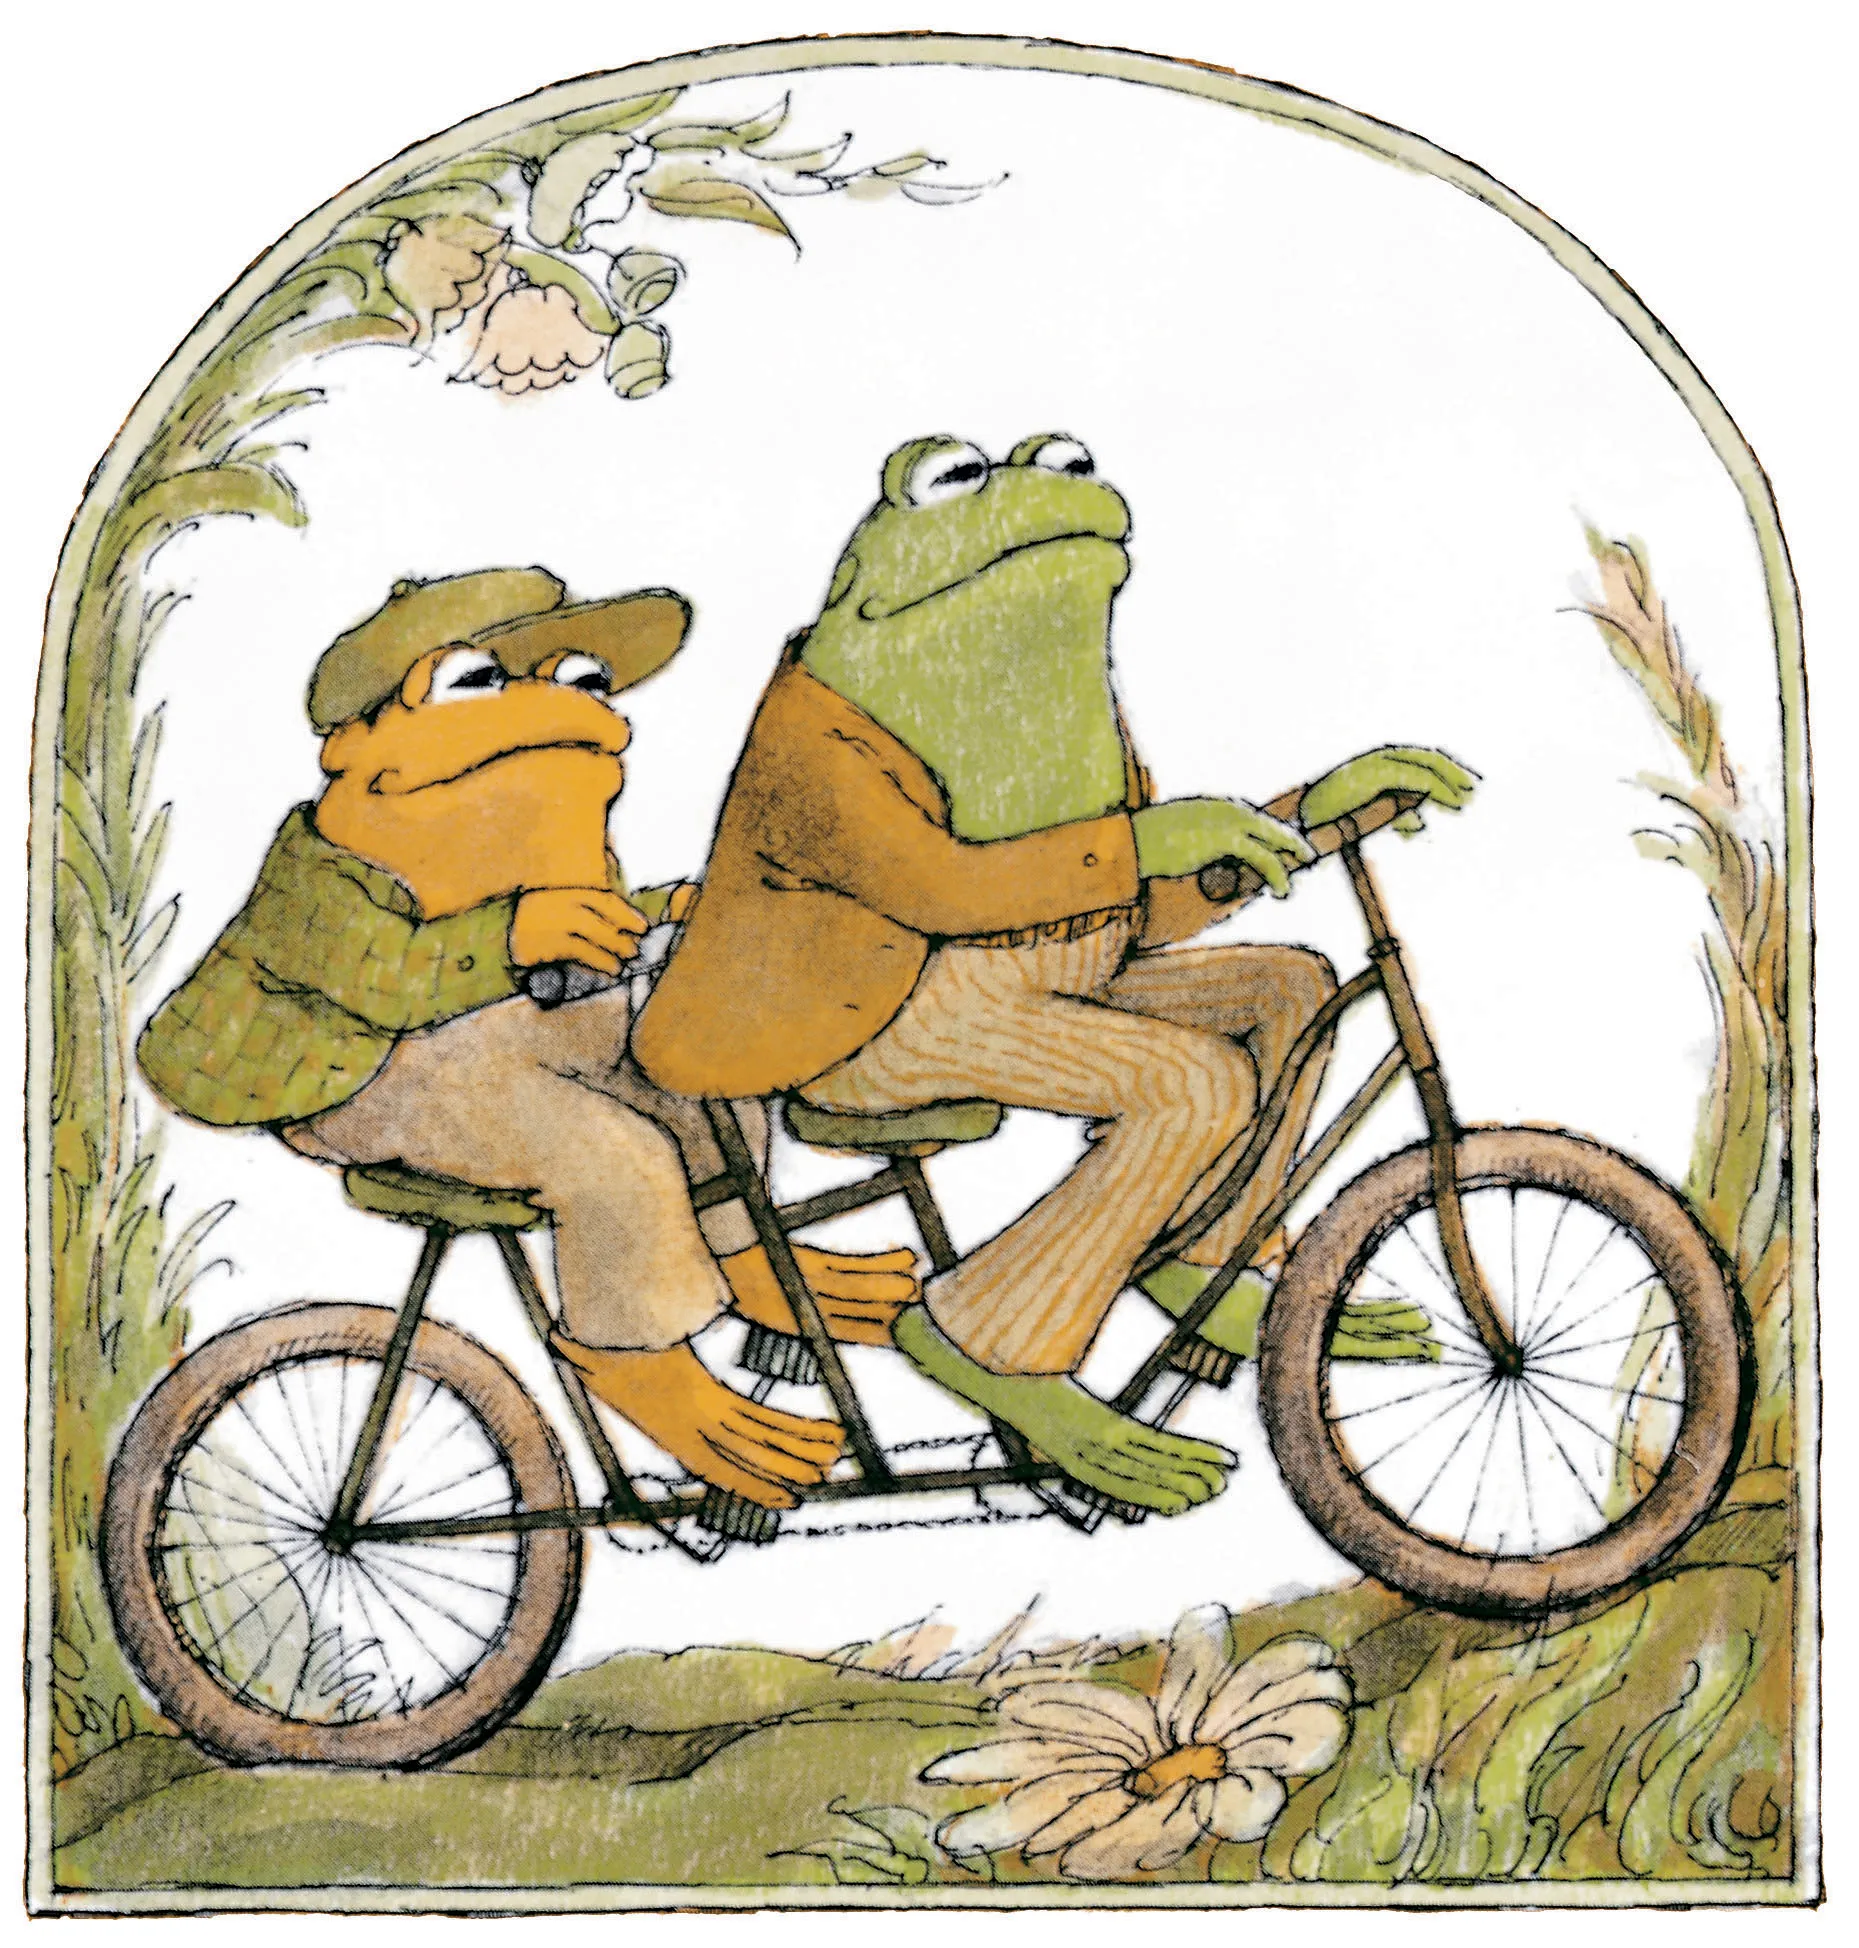 Frog and Toad on a tandem bicycle